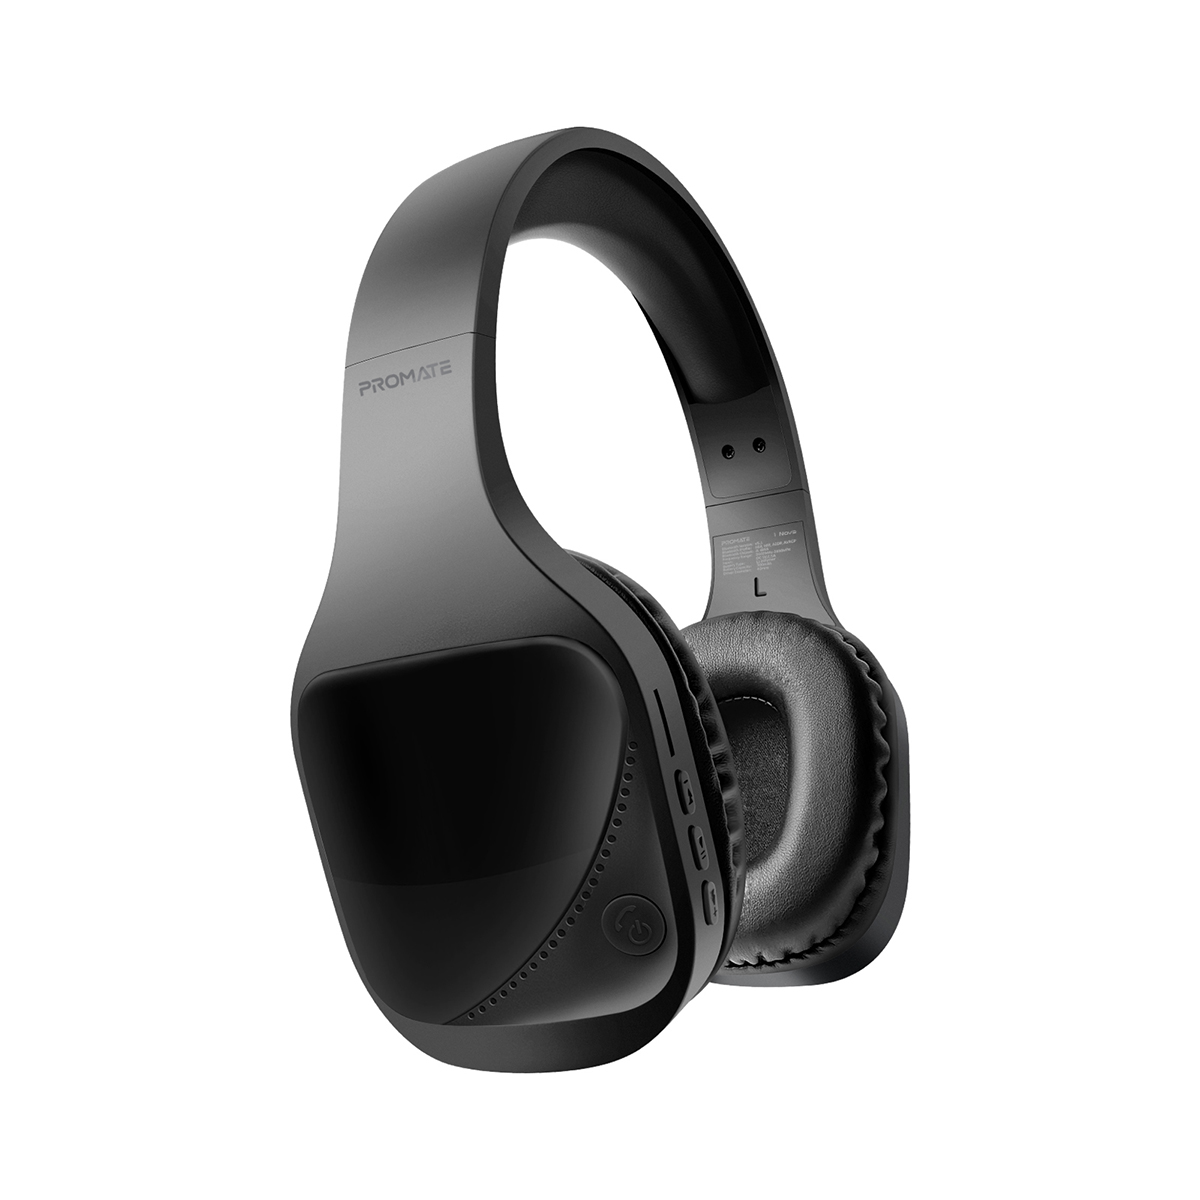 Promate Adjustable Wireless Headphones with Mic, FM, AUX Wired Mode, TF Card Slot and 10H Battery, Nova Black